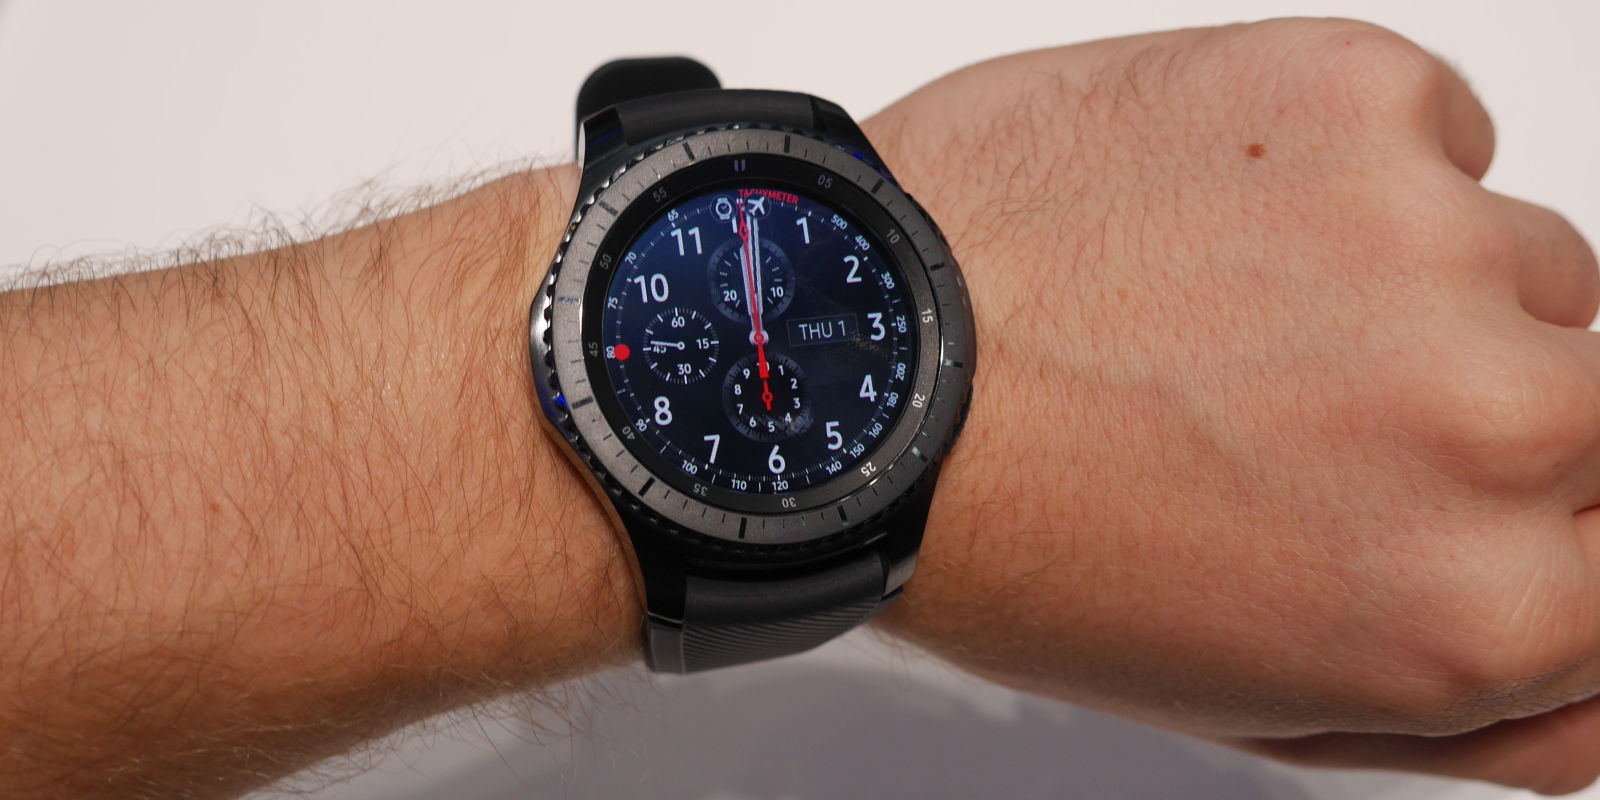 Samsung Gear S3 Review: Hands-On With The Latest Apple concernant Samsung Gear S3 Vs Galaxy Watch 3